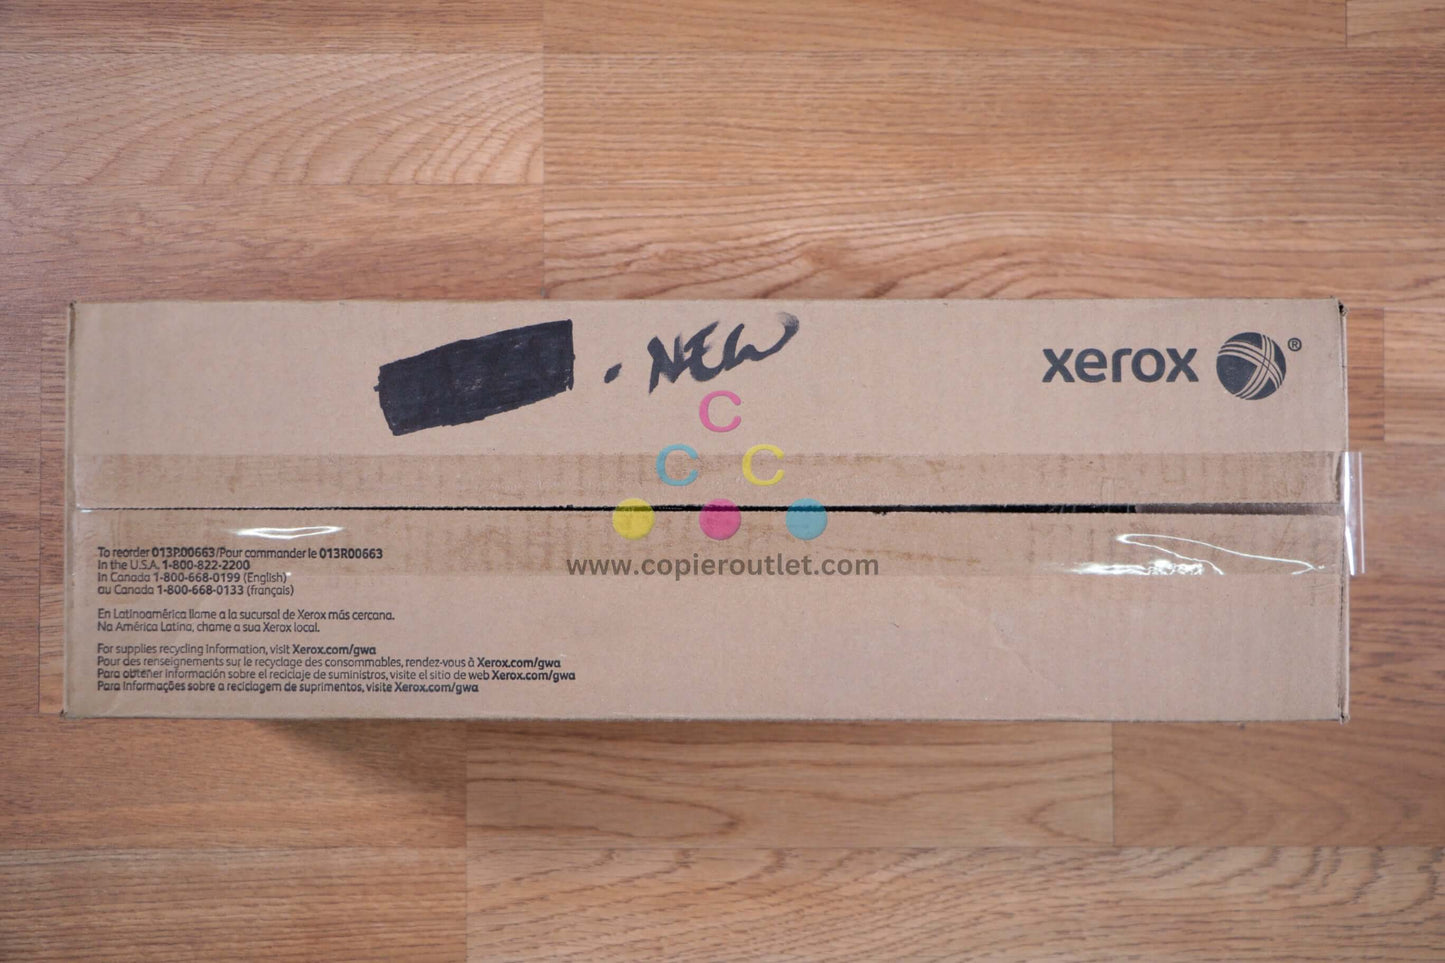 Xerox Black Drum Cartridge 013R00663 Color 550 560 570 C60 C70 Same Day Shipping - copier-clearance-center